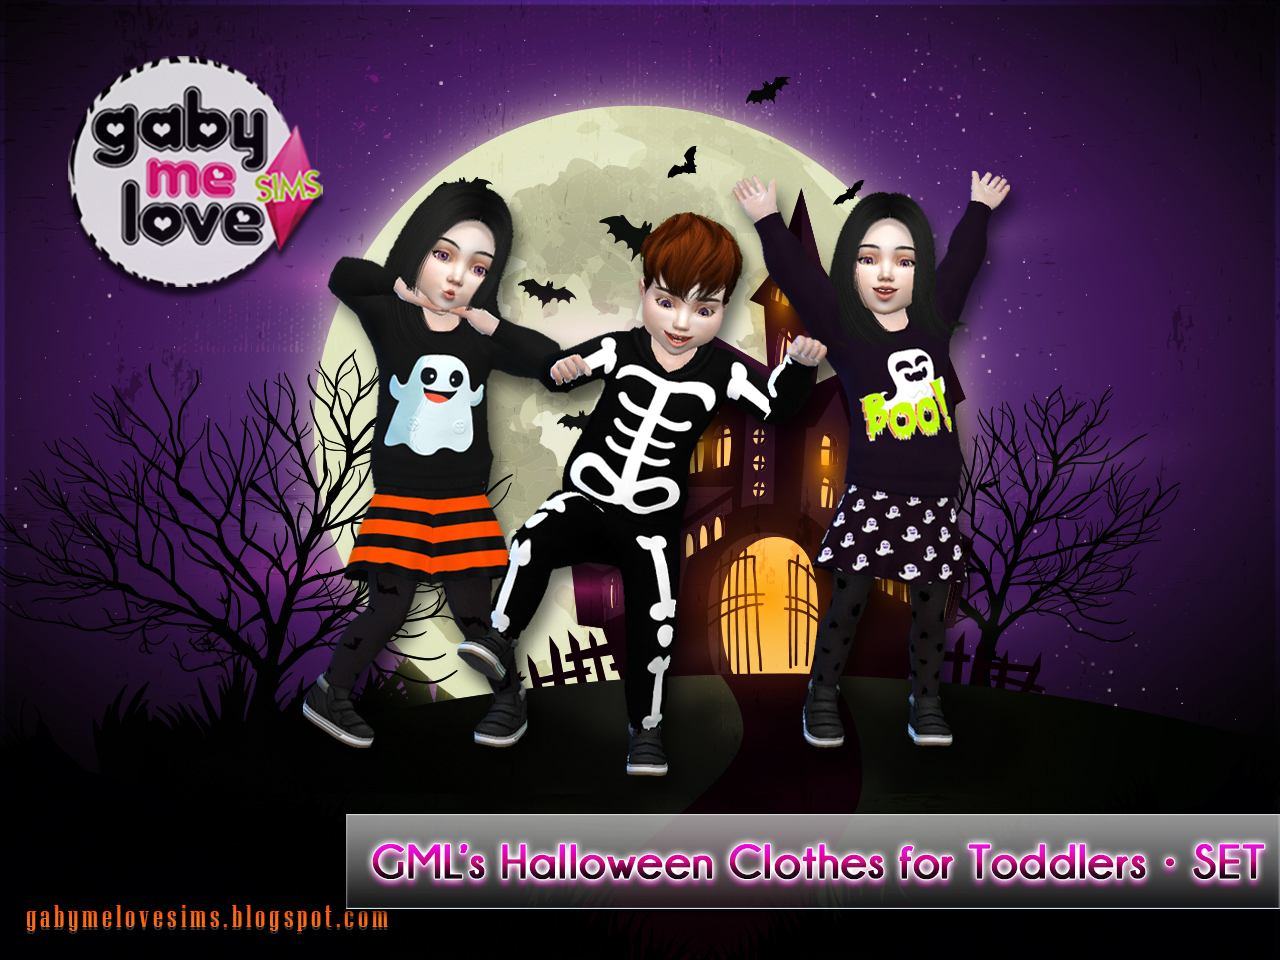 [Gabymelove Sims] GML’s Halloween Clothes for Toddlers • SET (1)